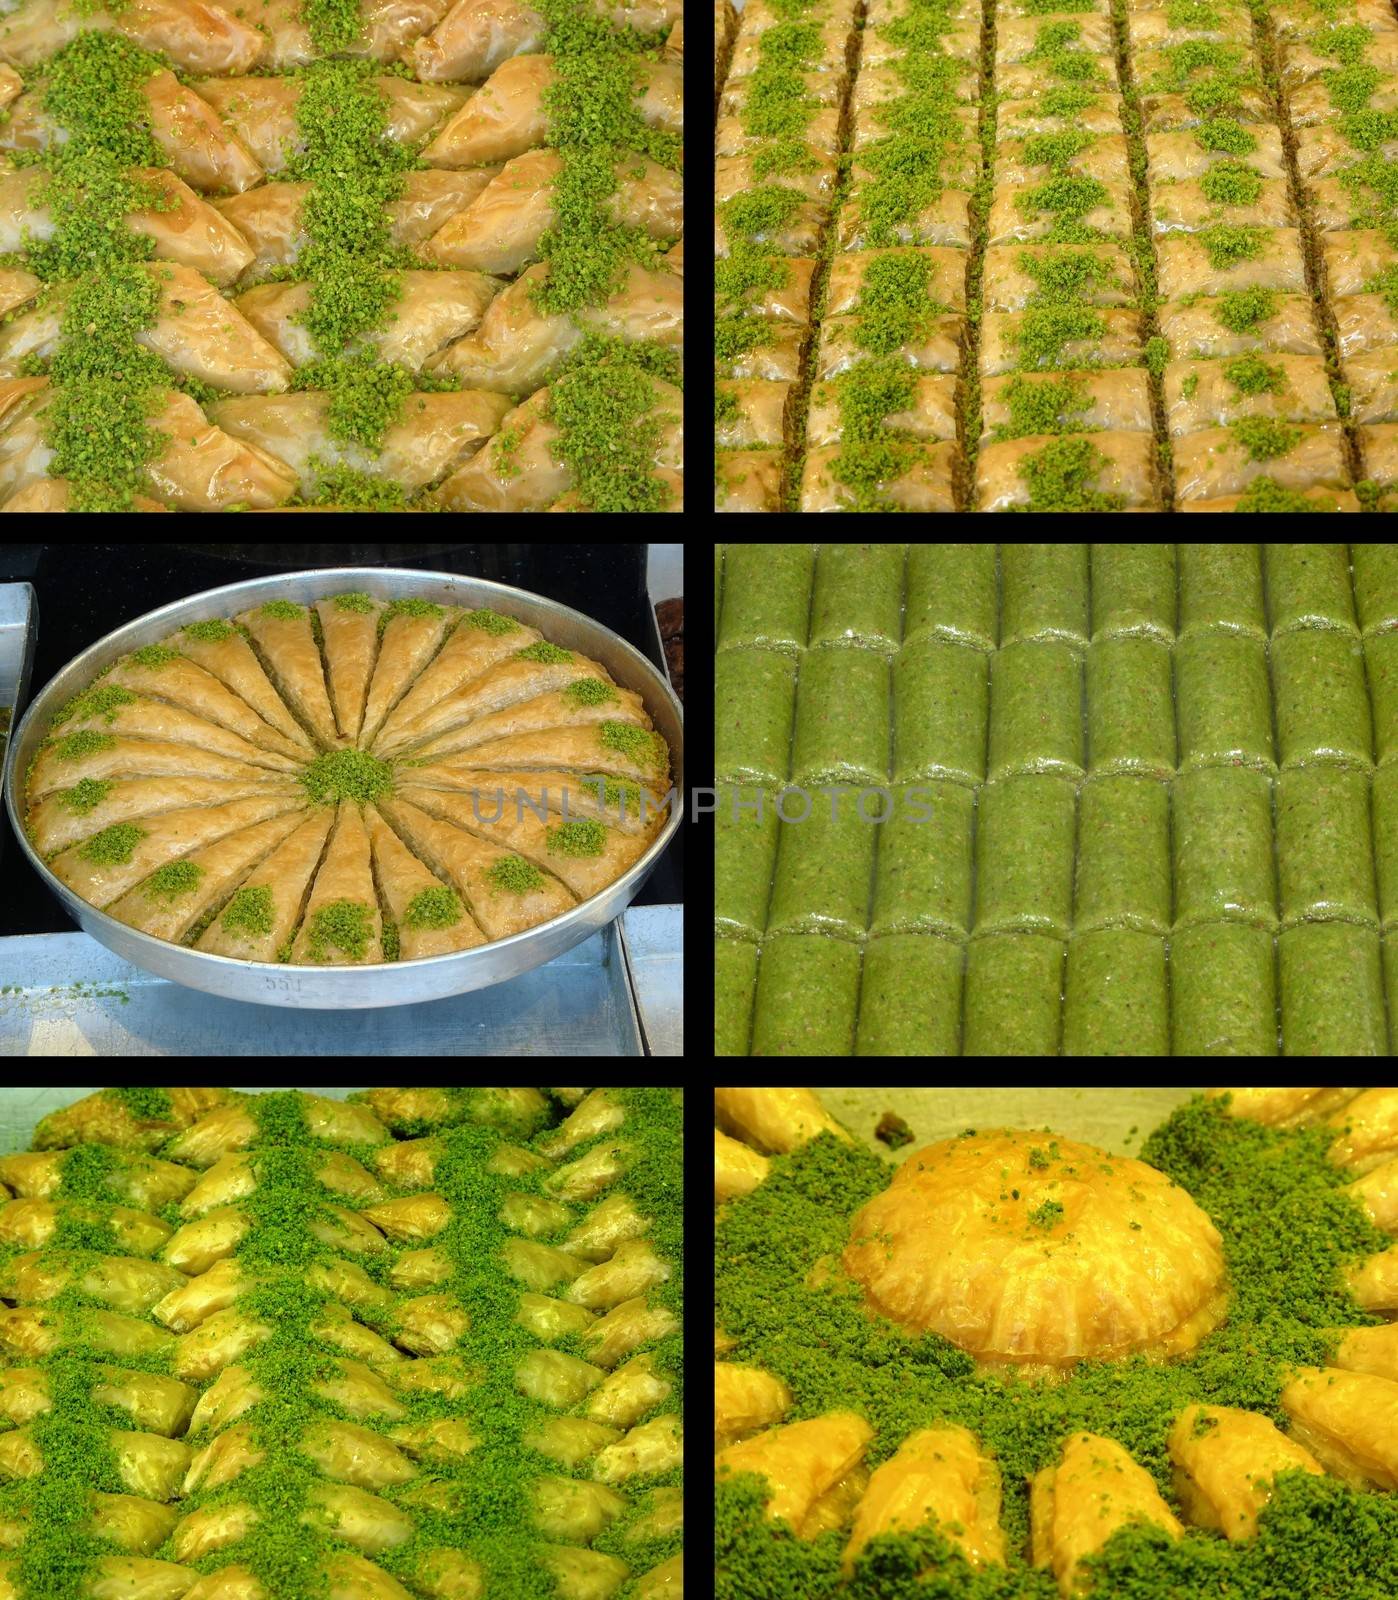 Baklava and shredded wheat varieties images